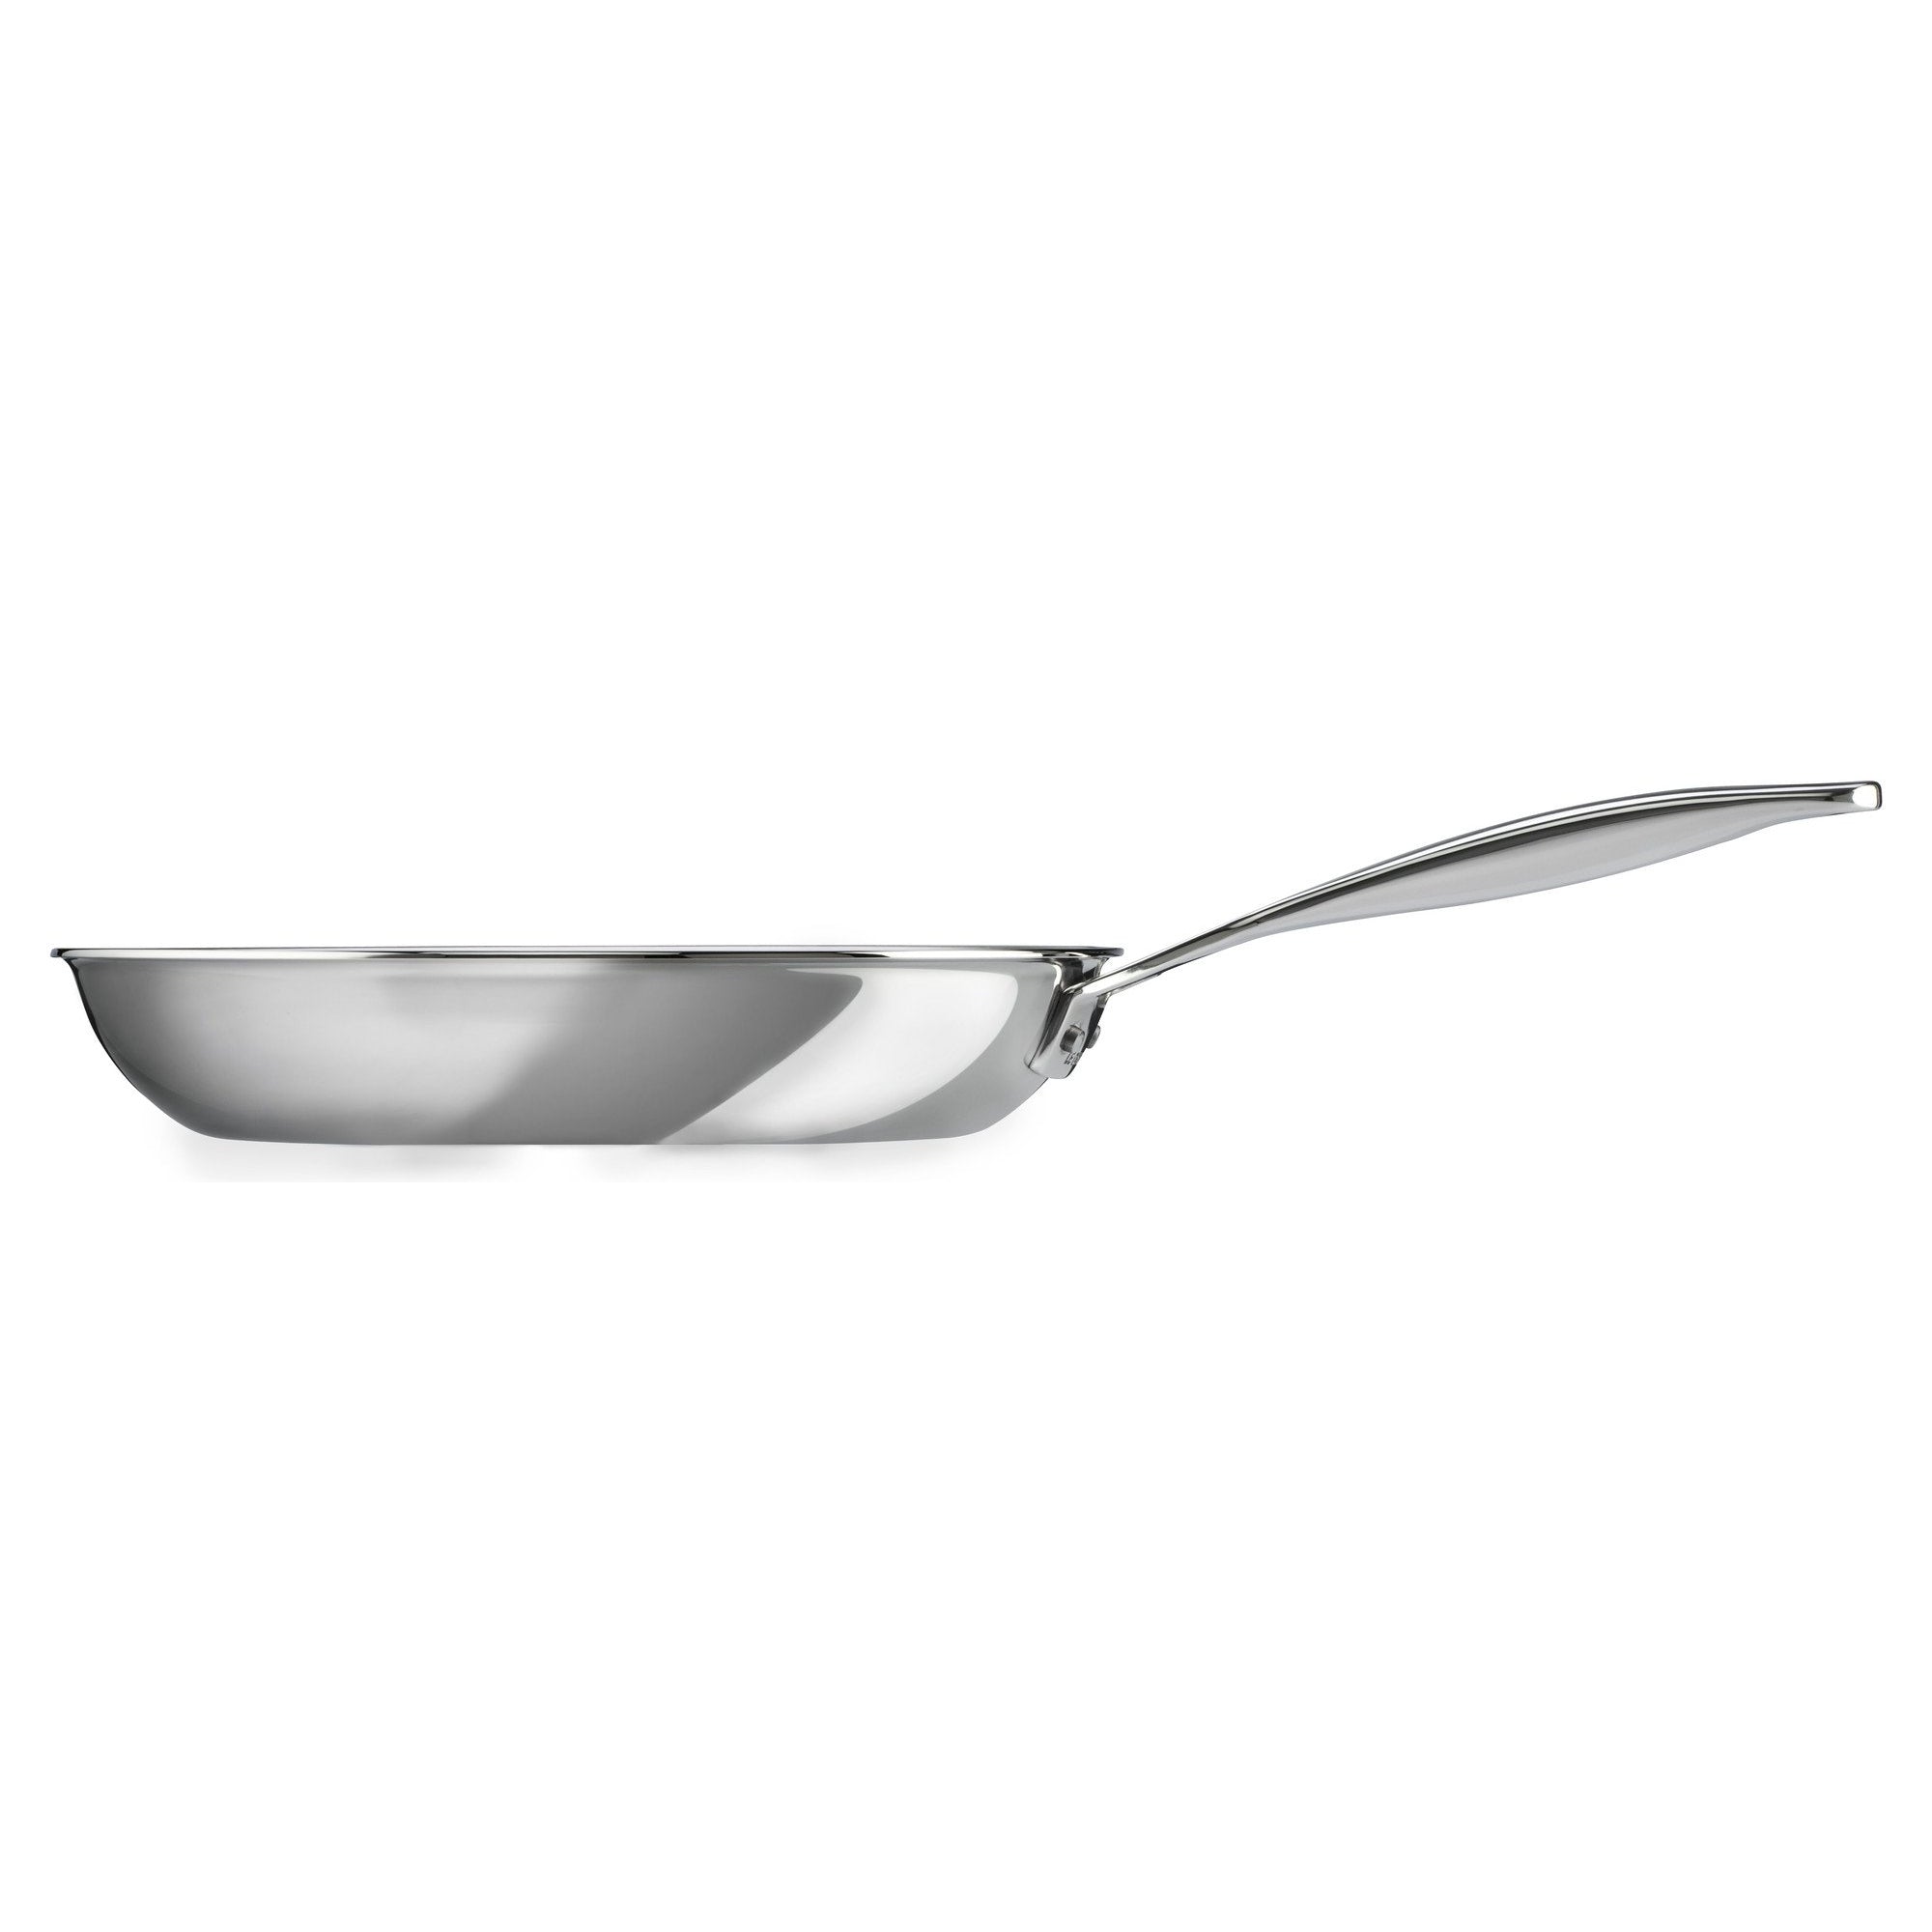 Le Creuset 30 cm Stainless Steel Frying Pan (12") -SSP2000-30 Side View